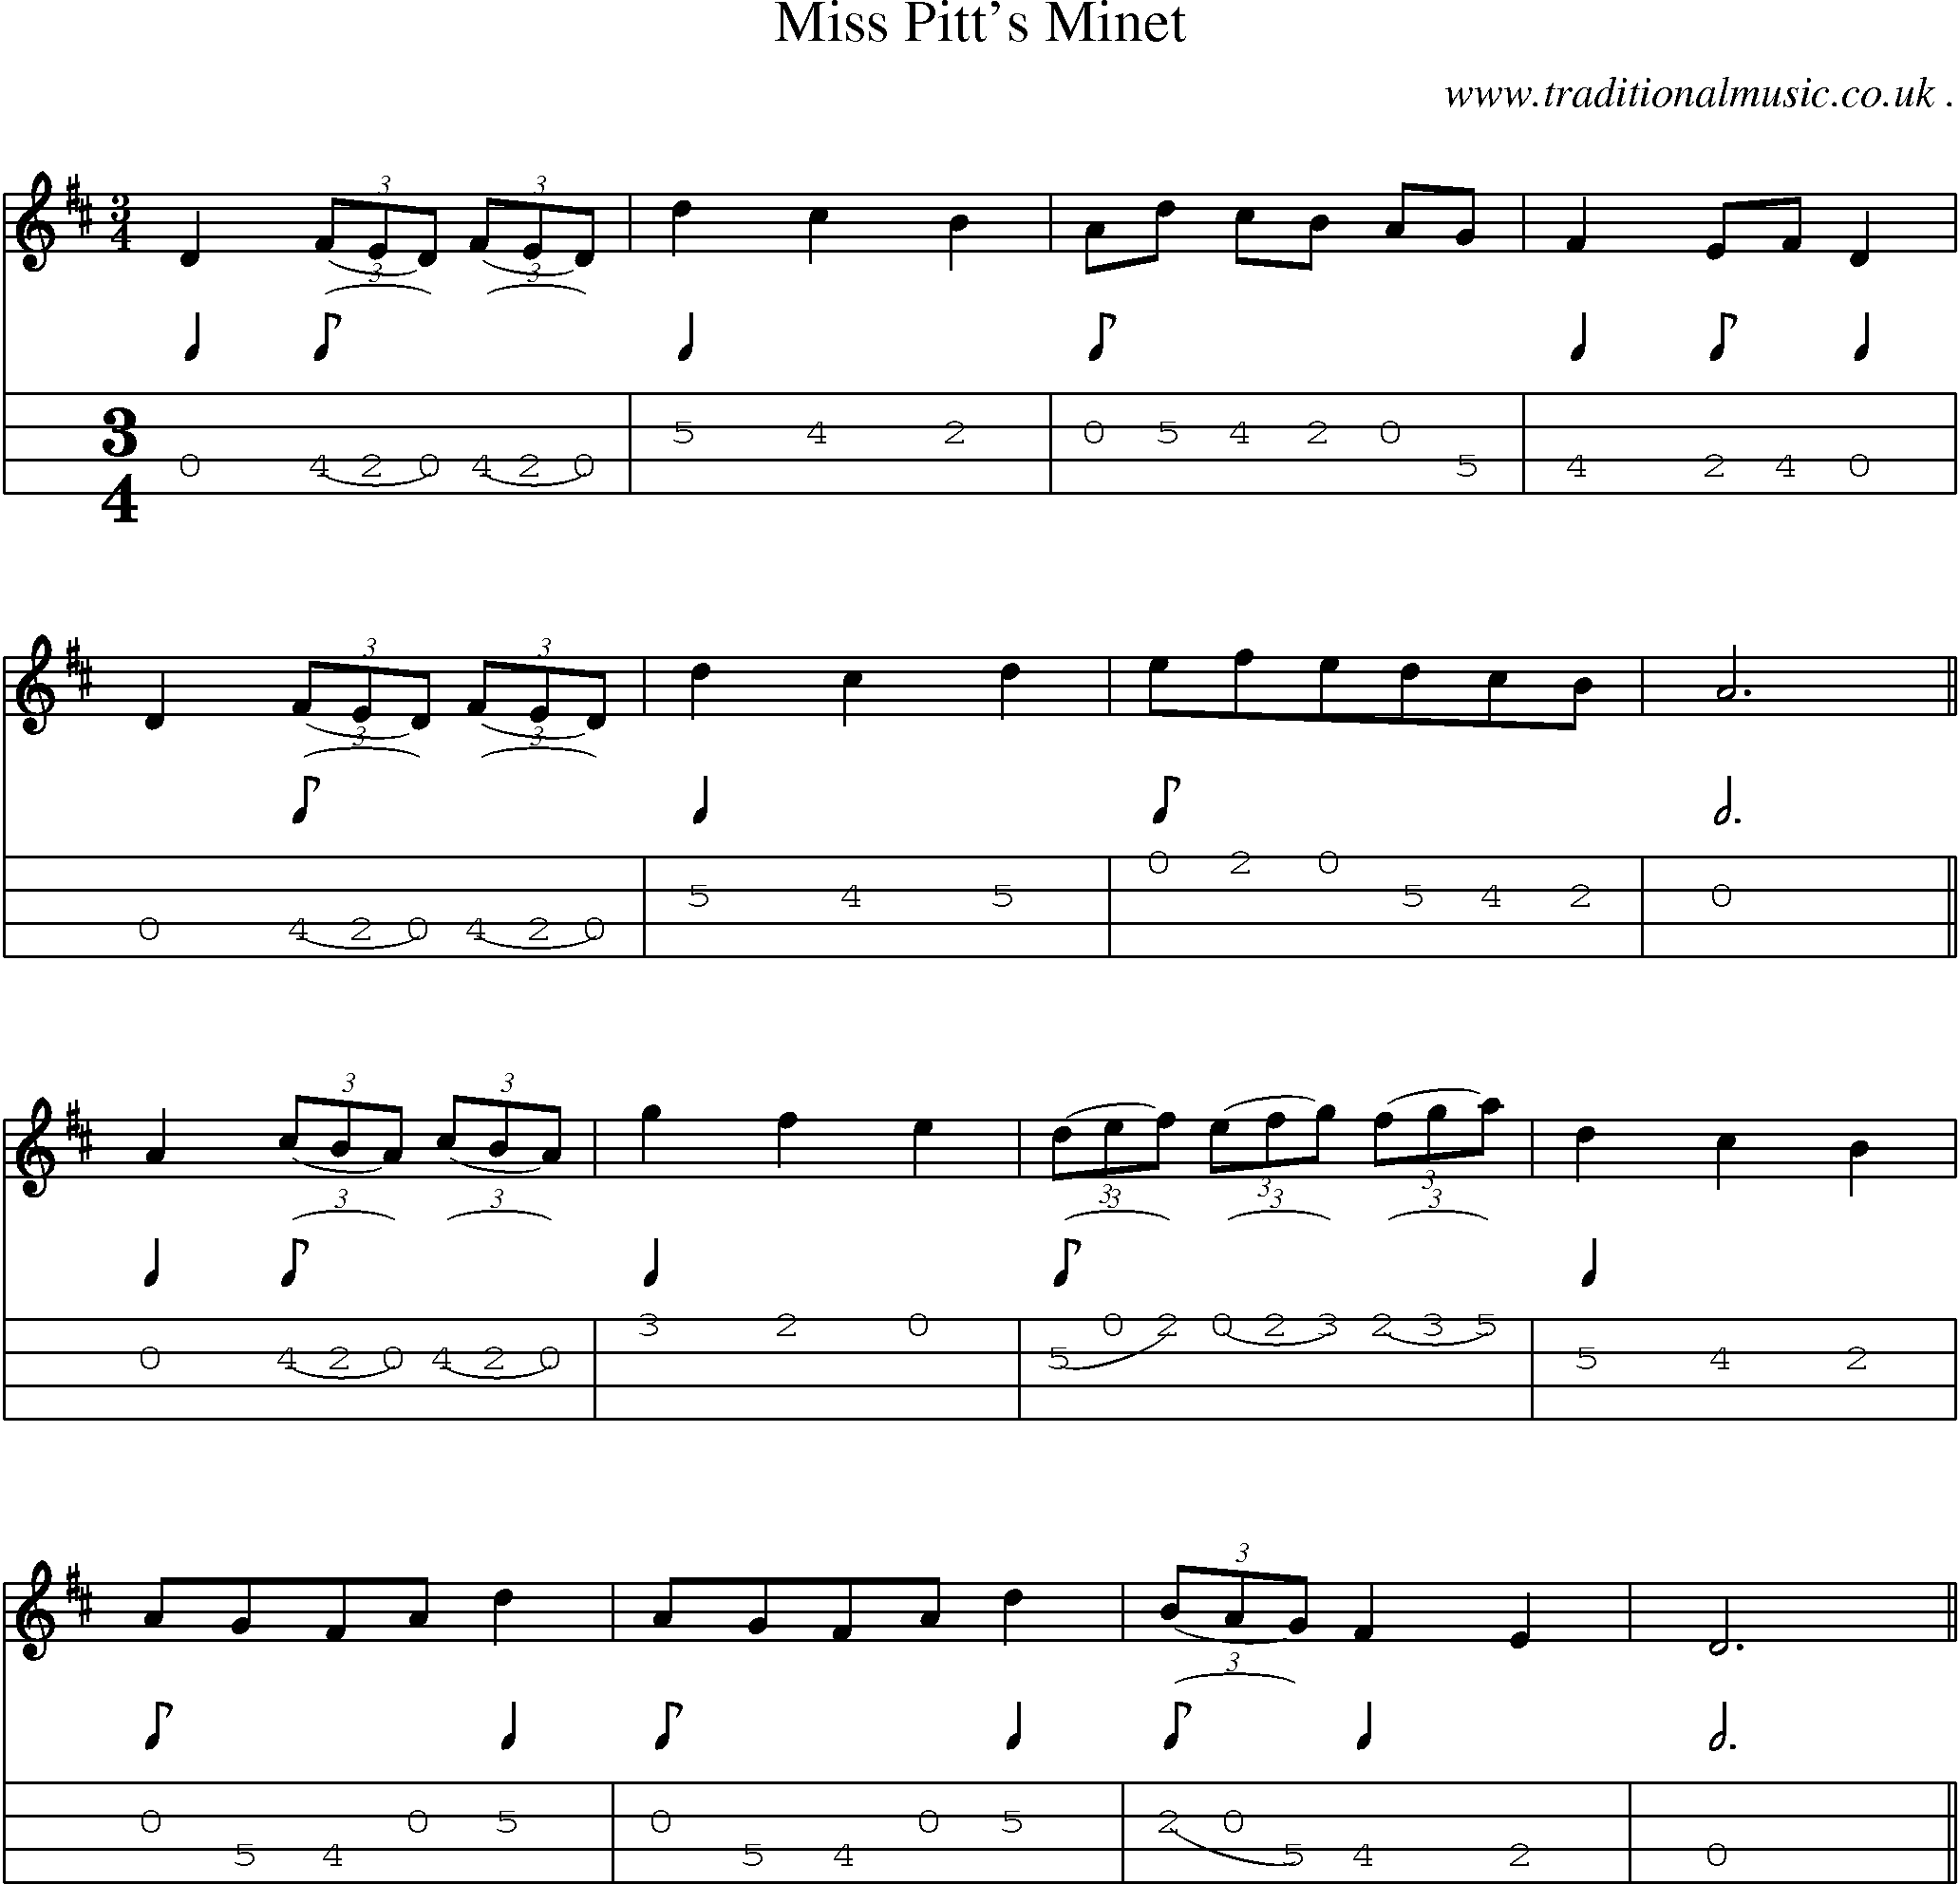 Sheet-Music and Mandolin Tabs for Miss Pitts Minet